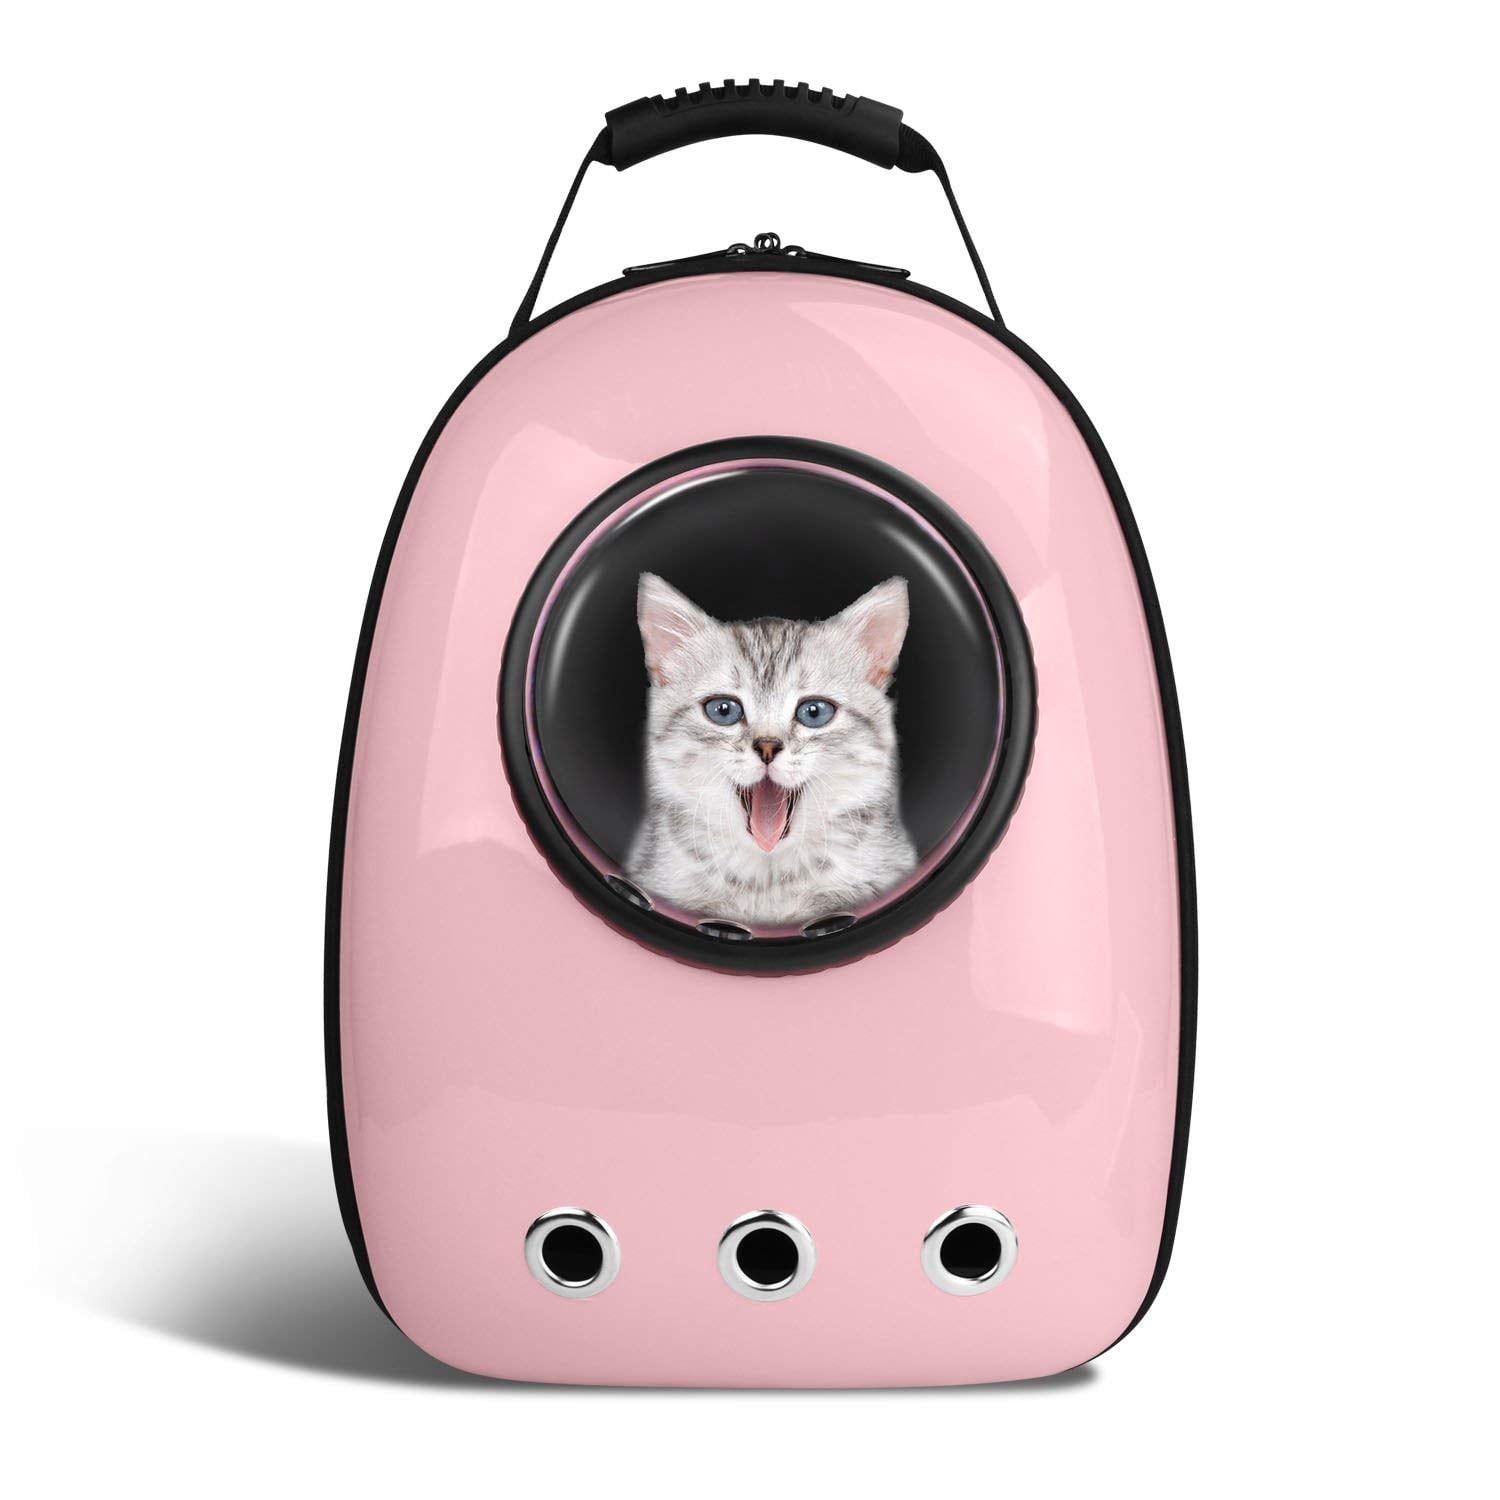 Anzone Pet Portable Carrier Space 